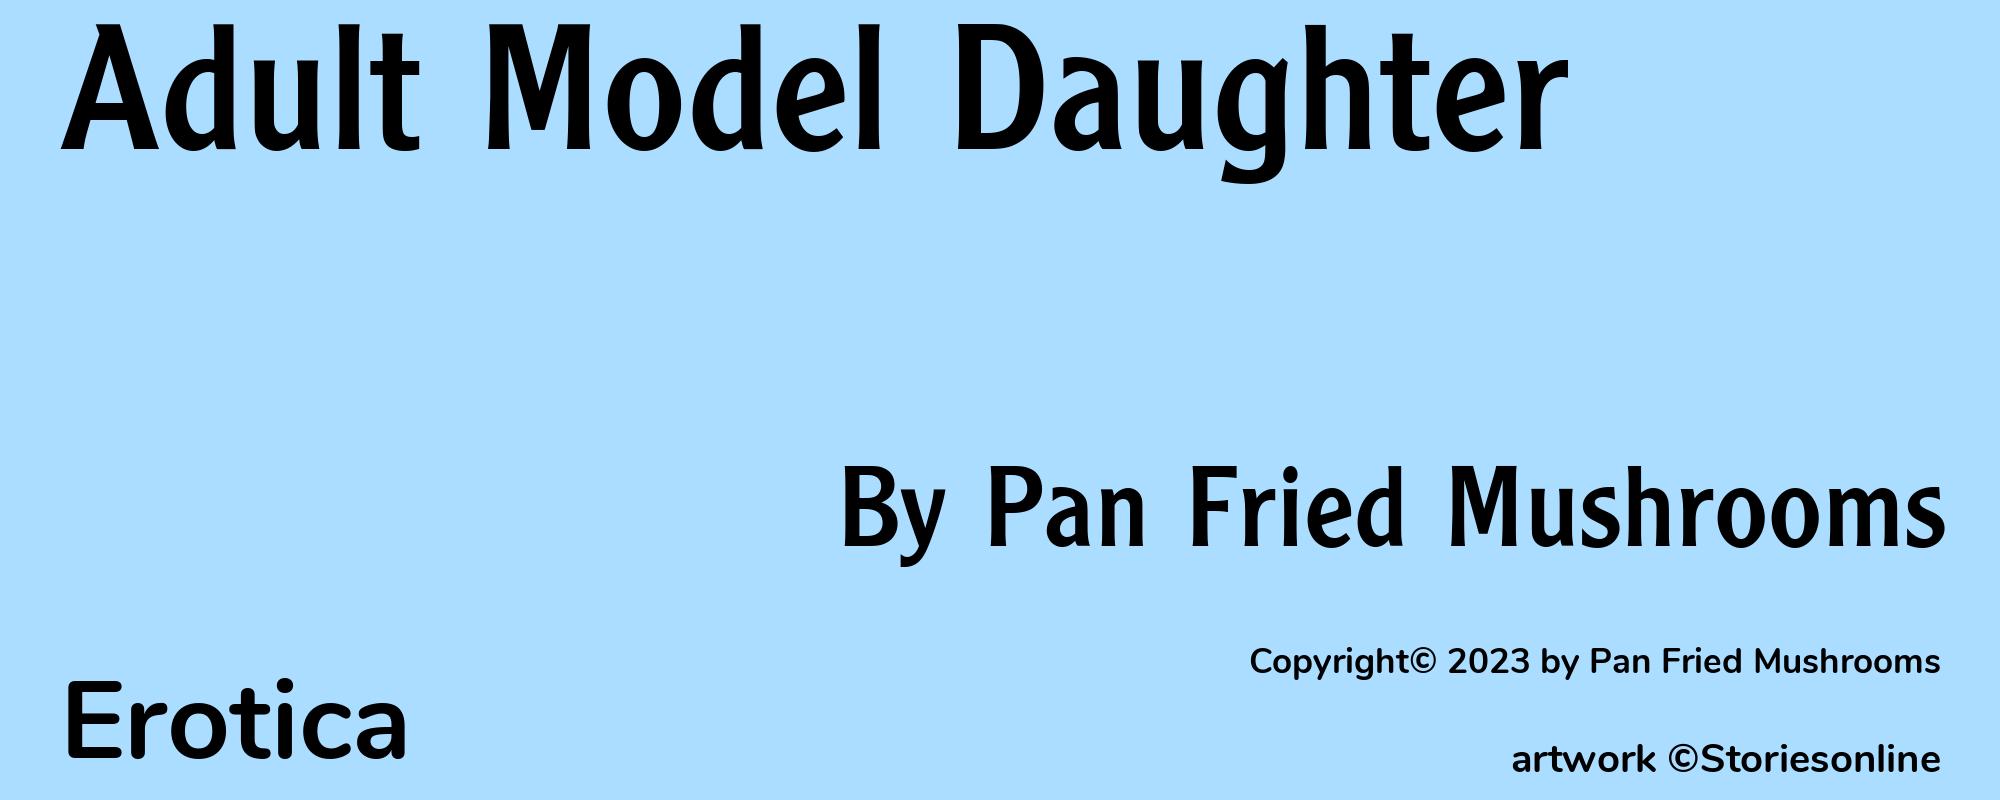 Adult Model Daughter - Cover